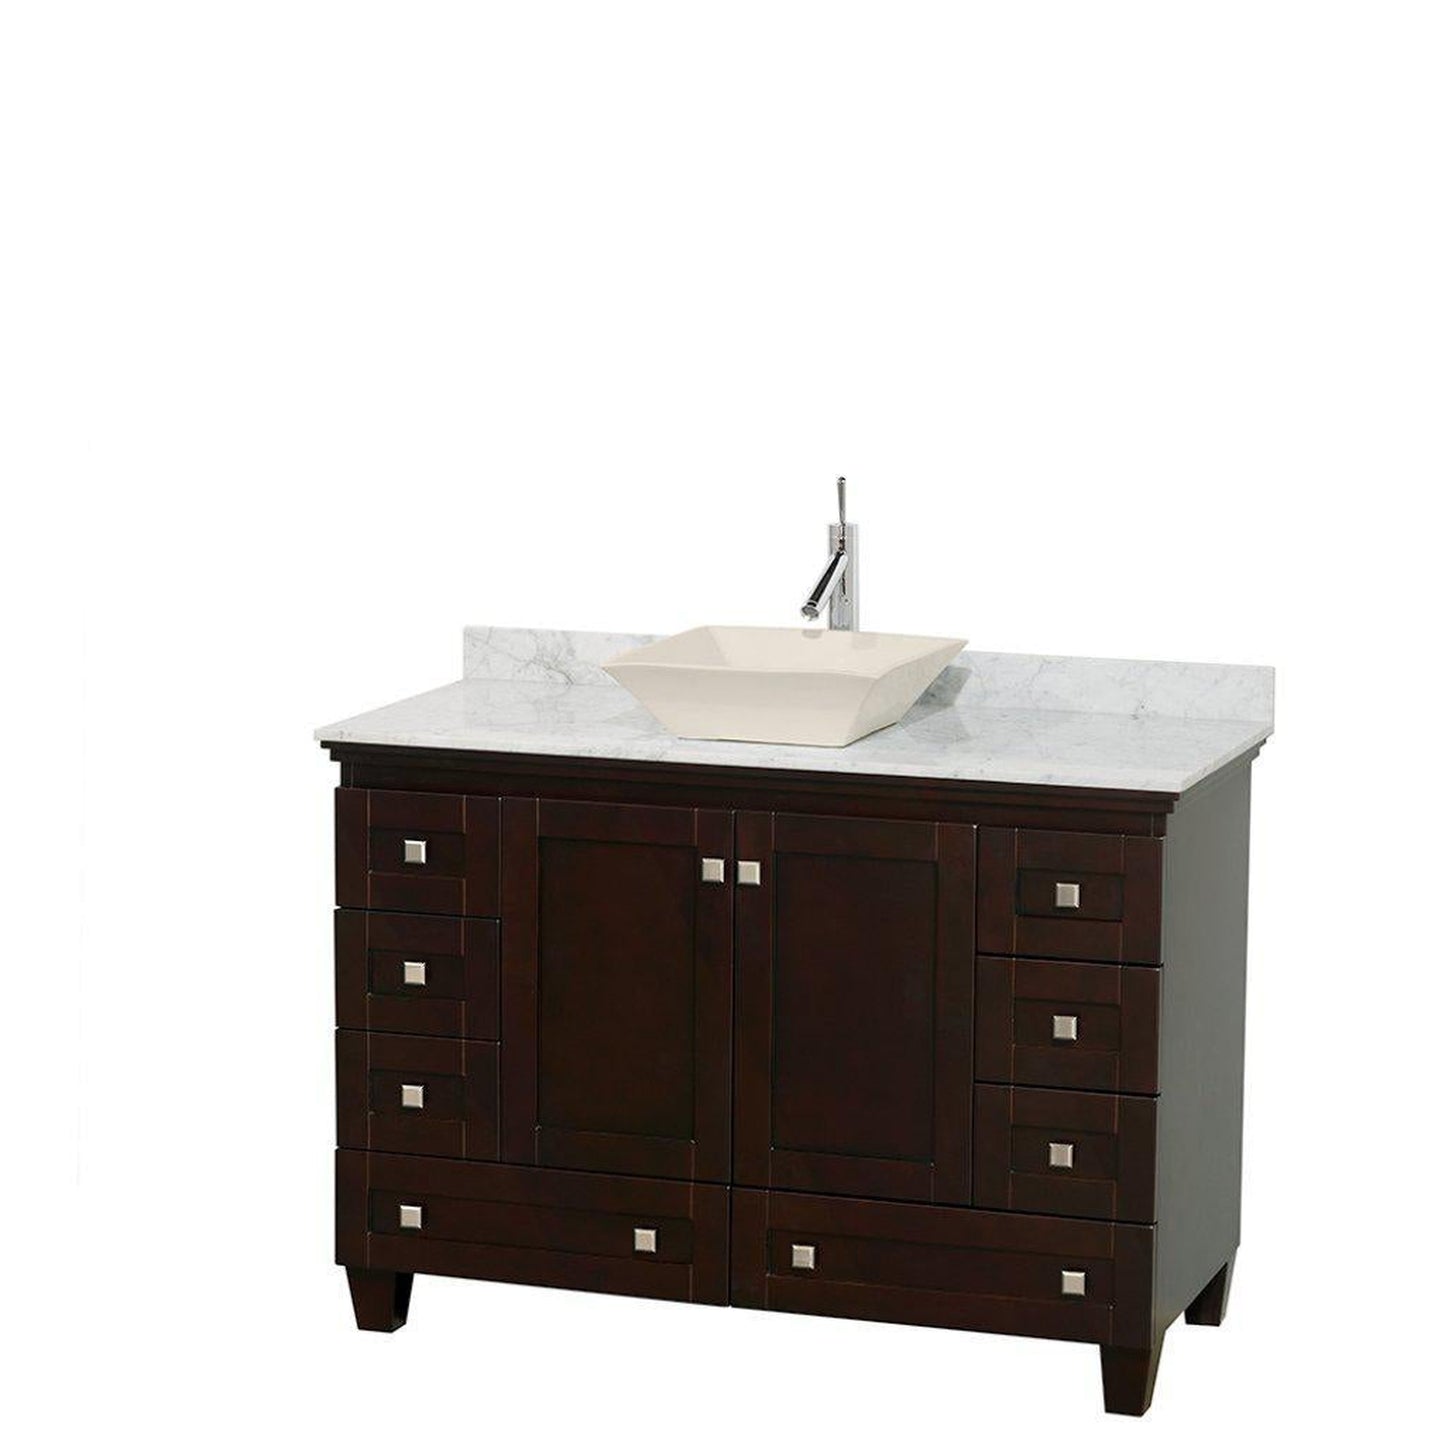 Wyndham Collection Acclaim 48" Single Bathroom Espresso Vanity With White Carrara Marble Countertop And Pyra Bone Sink